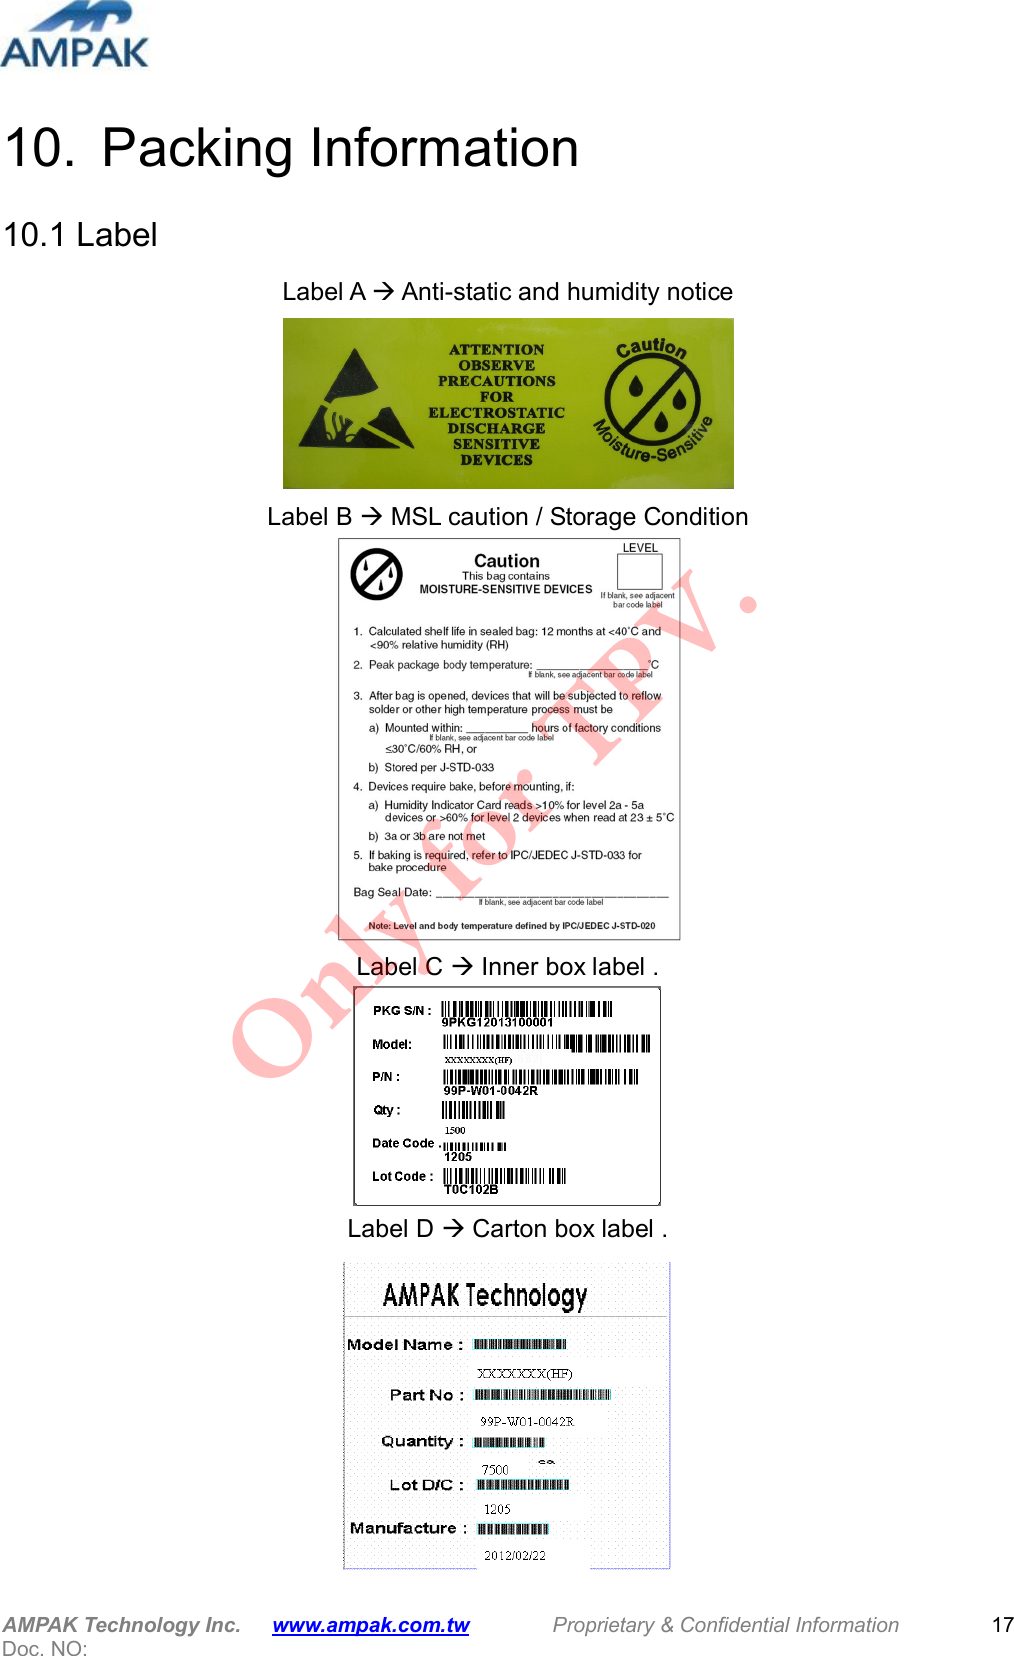  AMPAK Technology Inc.      www.ampak.com.tw        Proprietary &amp; Confidential Information       Doc. NO:   17 10.  Packing Information 10.1 Label Label A  Anti-static and humidity notice  Label B  MSL caution / Storage Condition  Label C  Inner box label .  Label D  Carton box label .  Only for TPV.